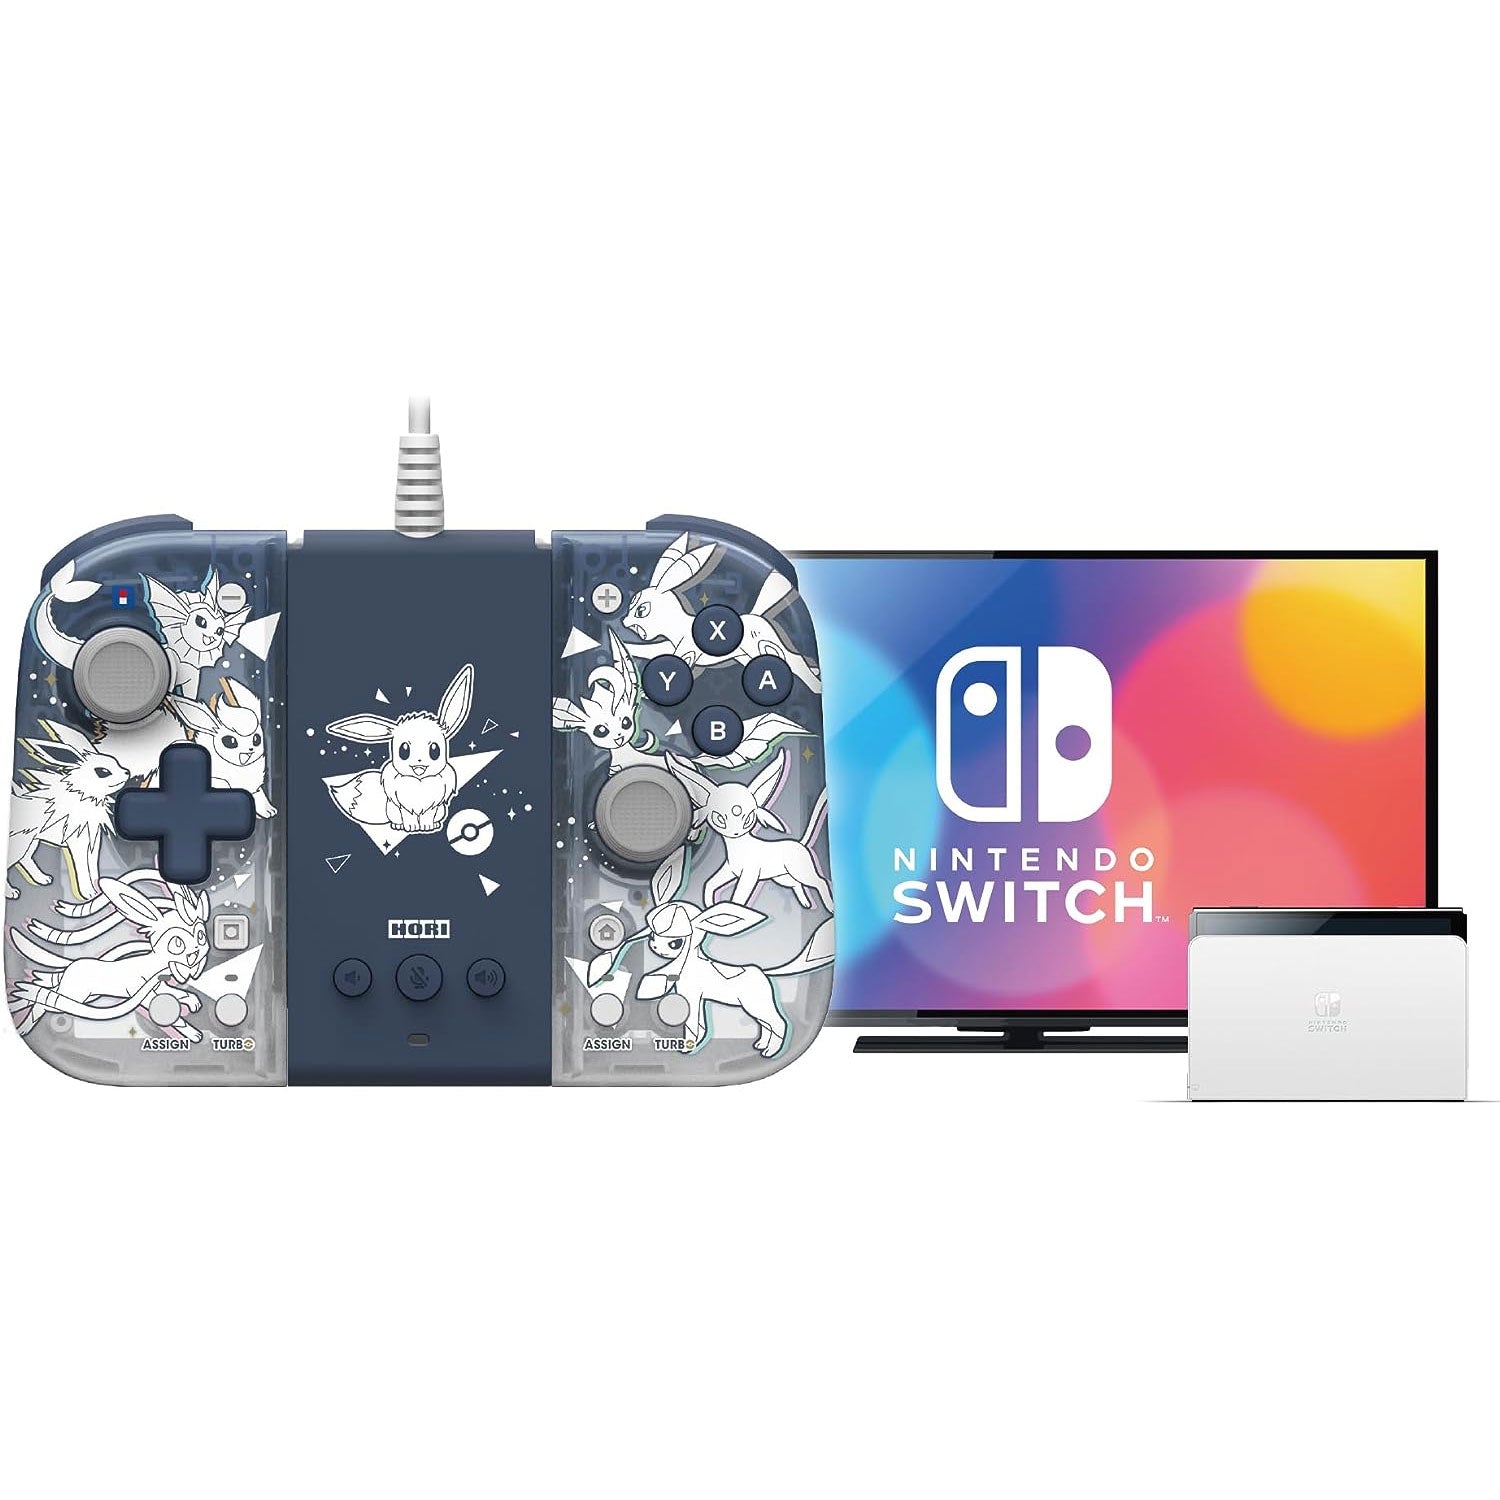 HORI Split Pad Compact Attachment Set (Eevee) for Nintendo Switch -  Officially Licensed By Nintendo and The Pokémon Company International